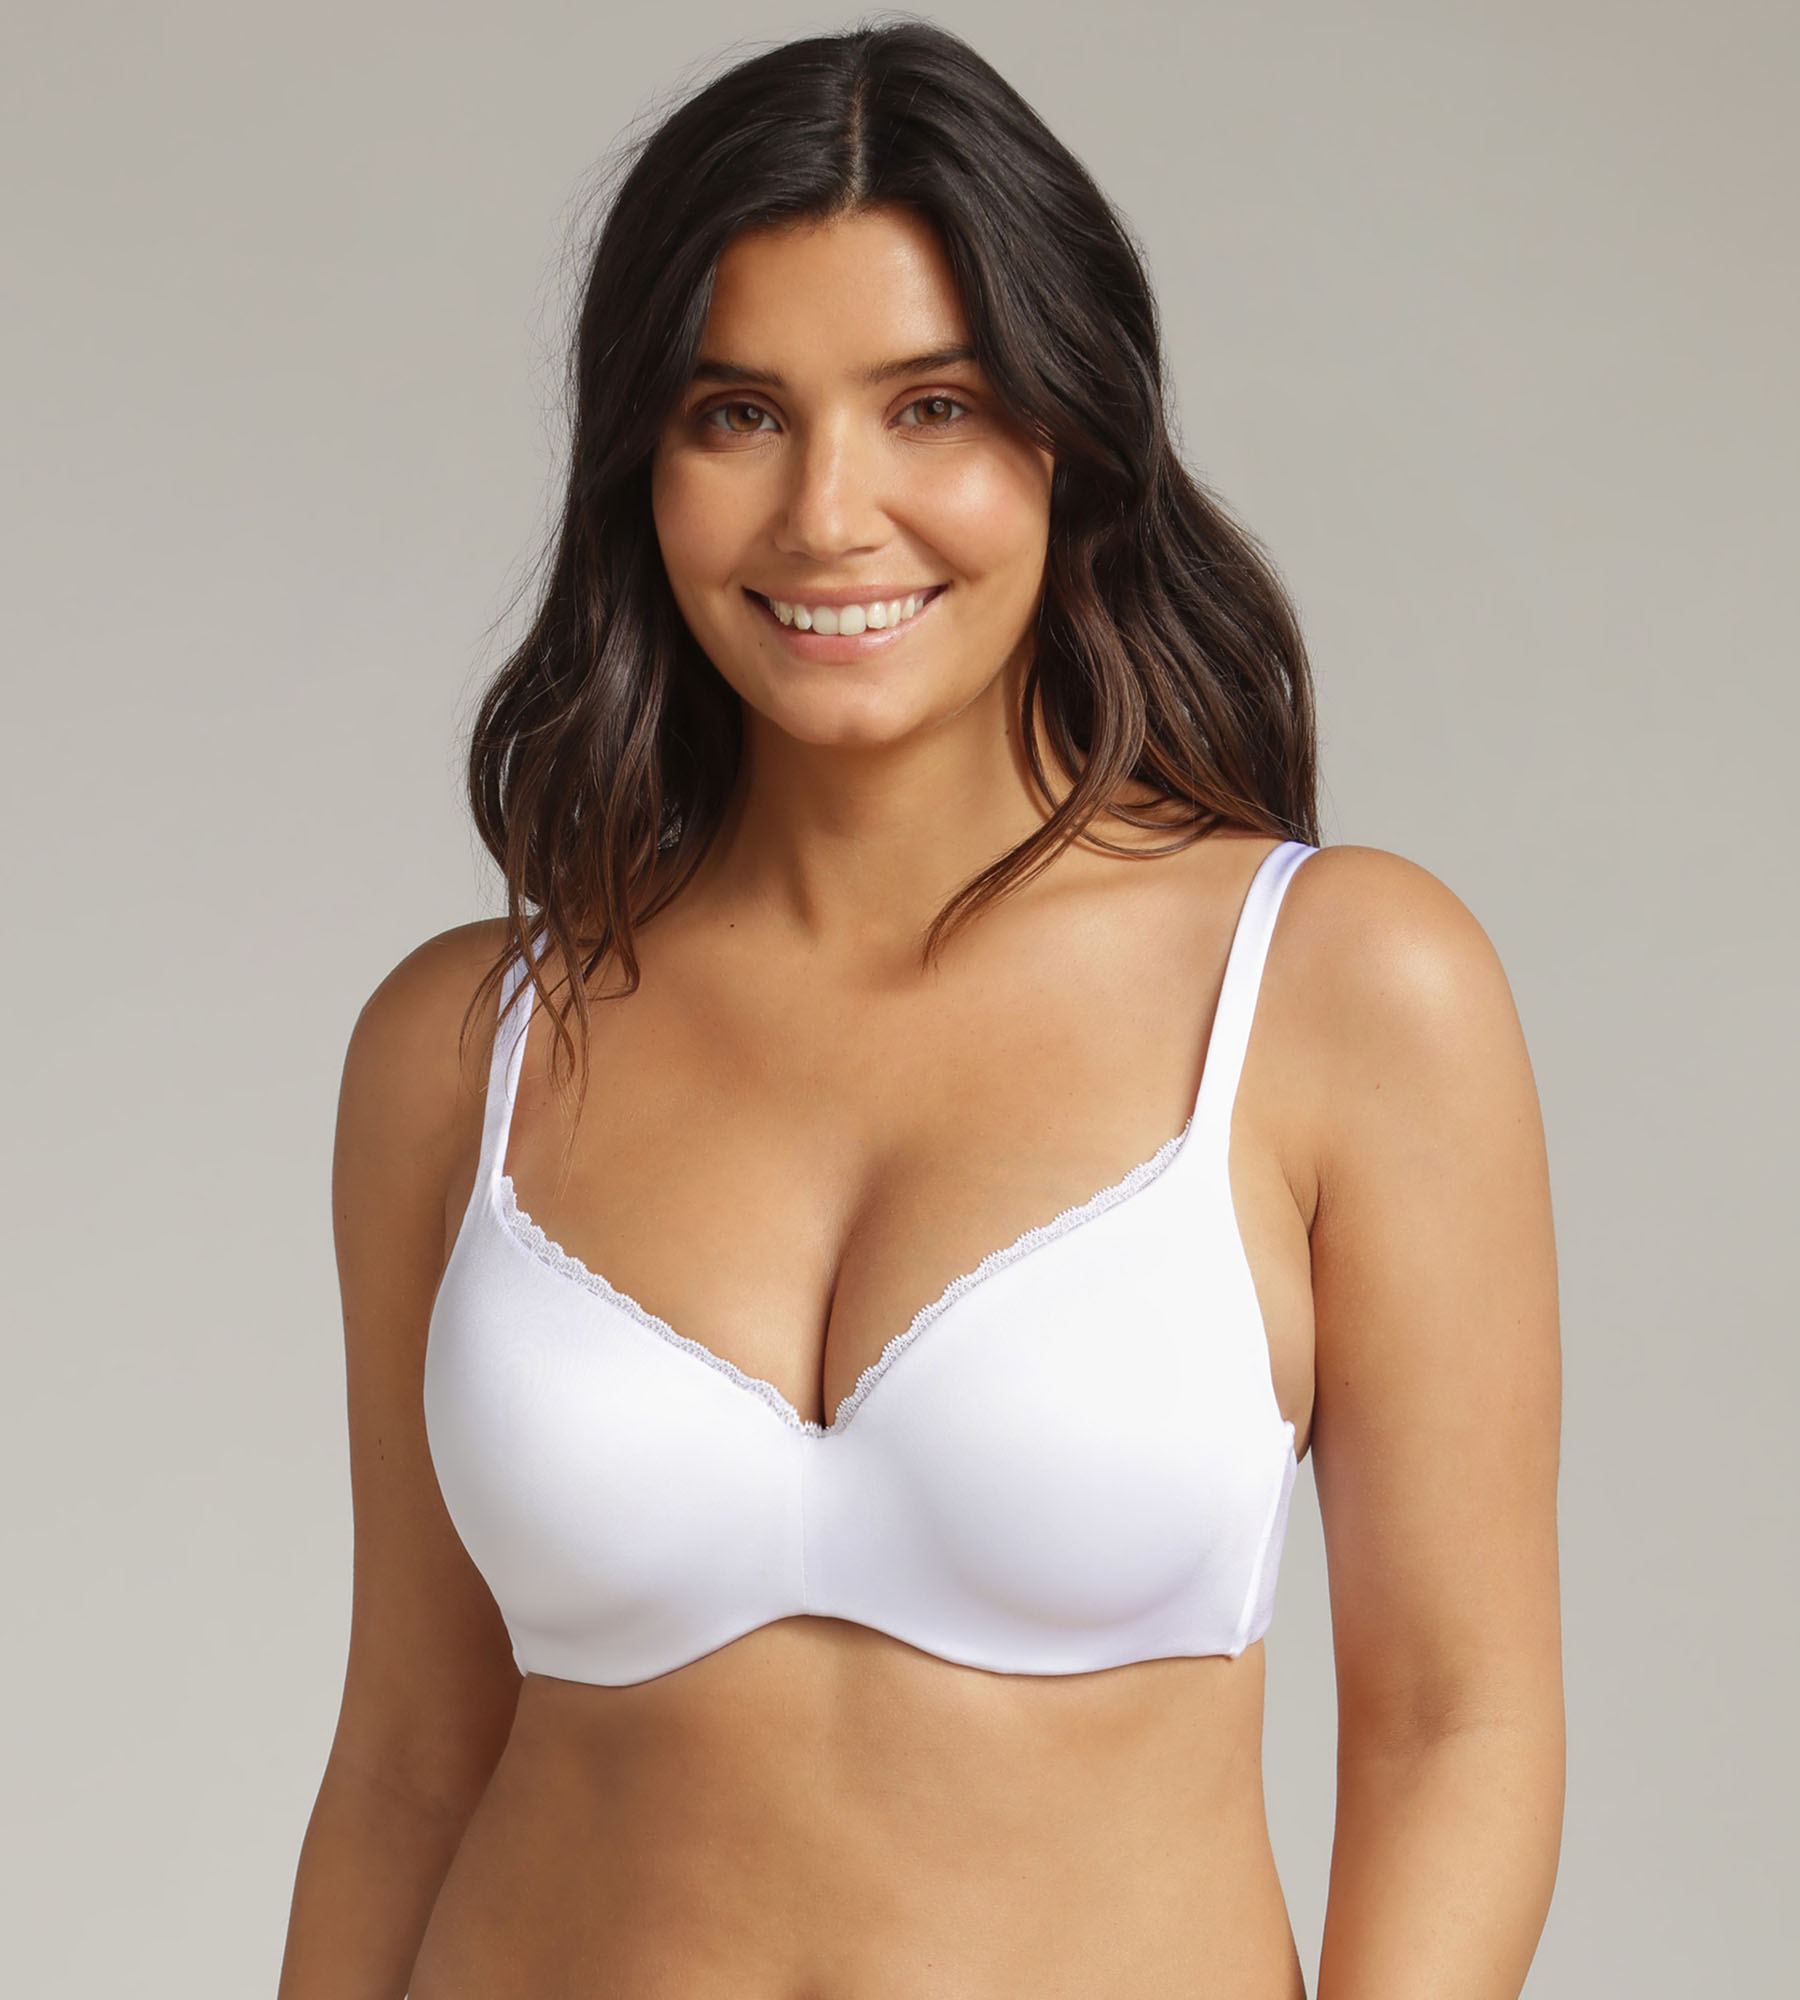 Bra Fittings By Court - 42B ➡️ 40DDD US / 40E UK Went down 1 band size and  up 4 cup sizes. One of our favorite tricks to getting bras to fit